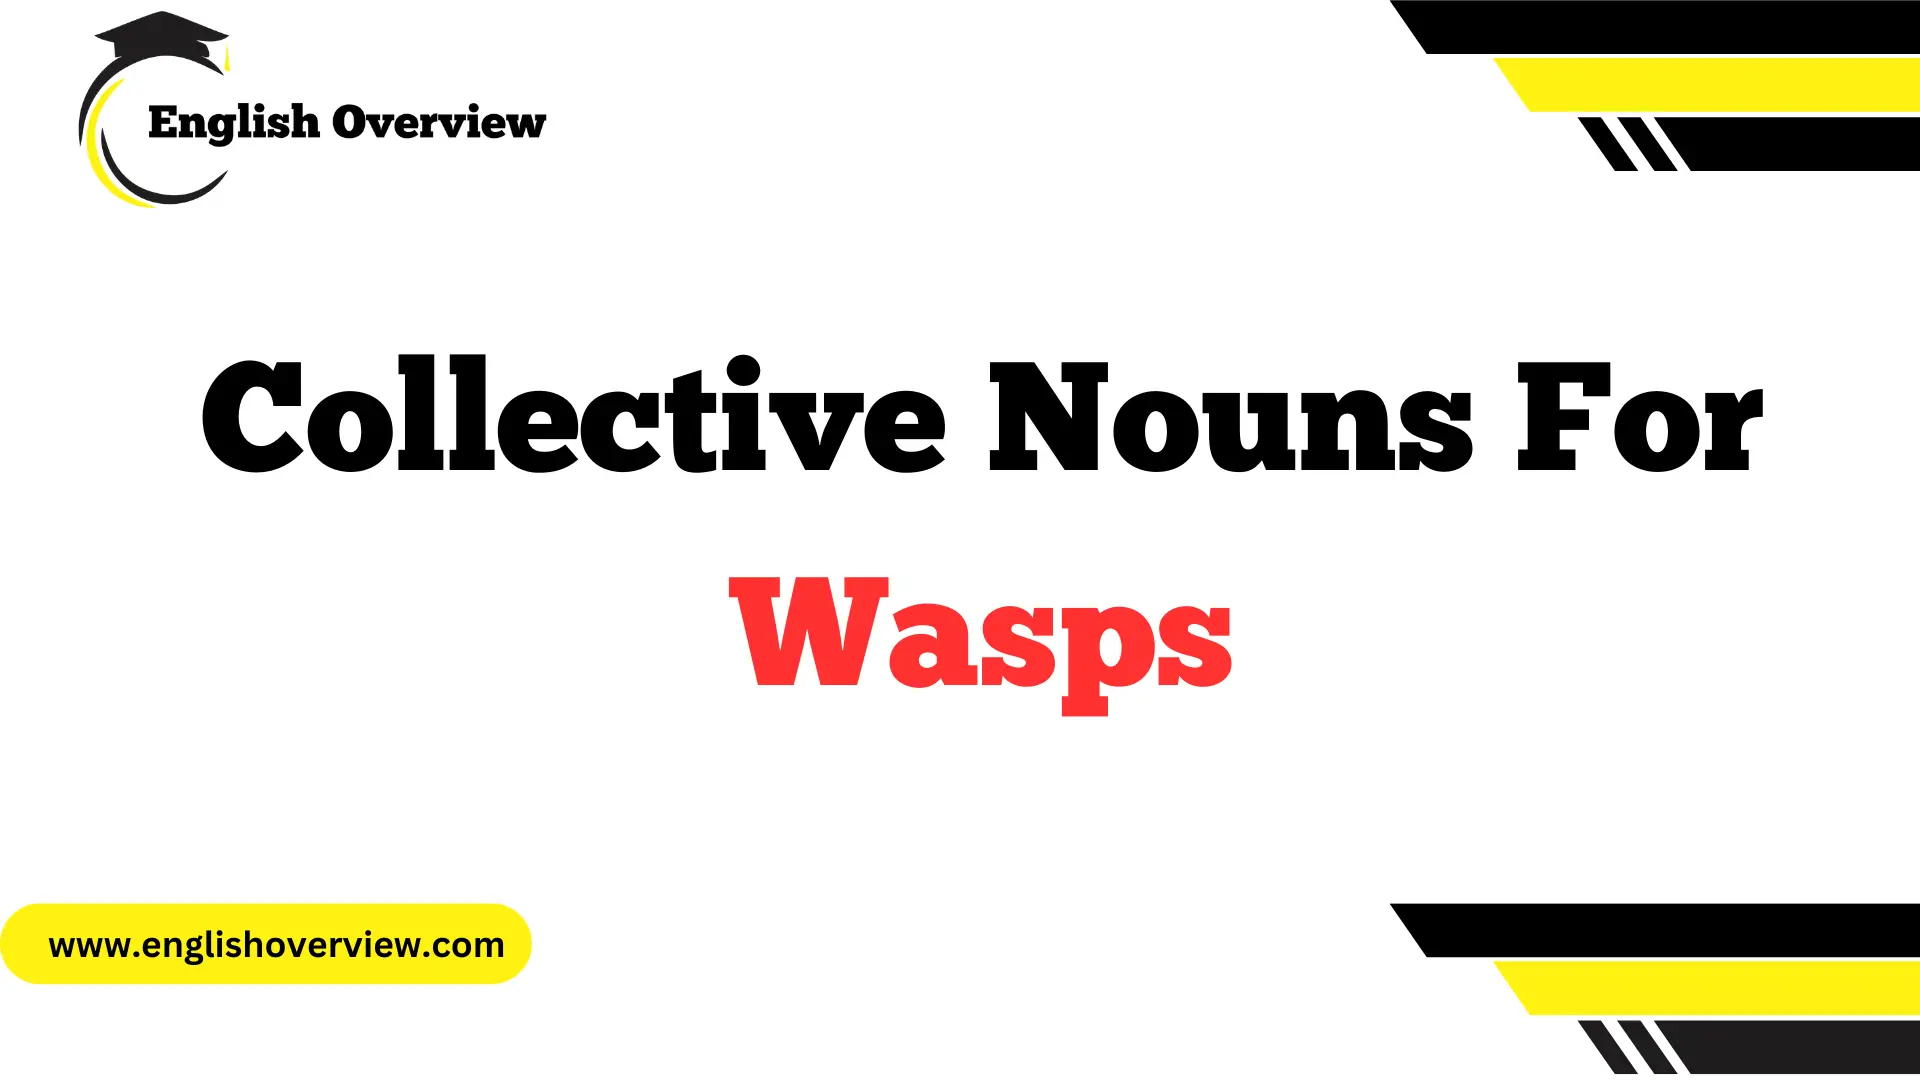 Collective Nouns For Wasps